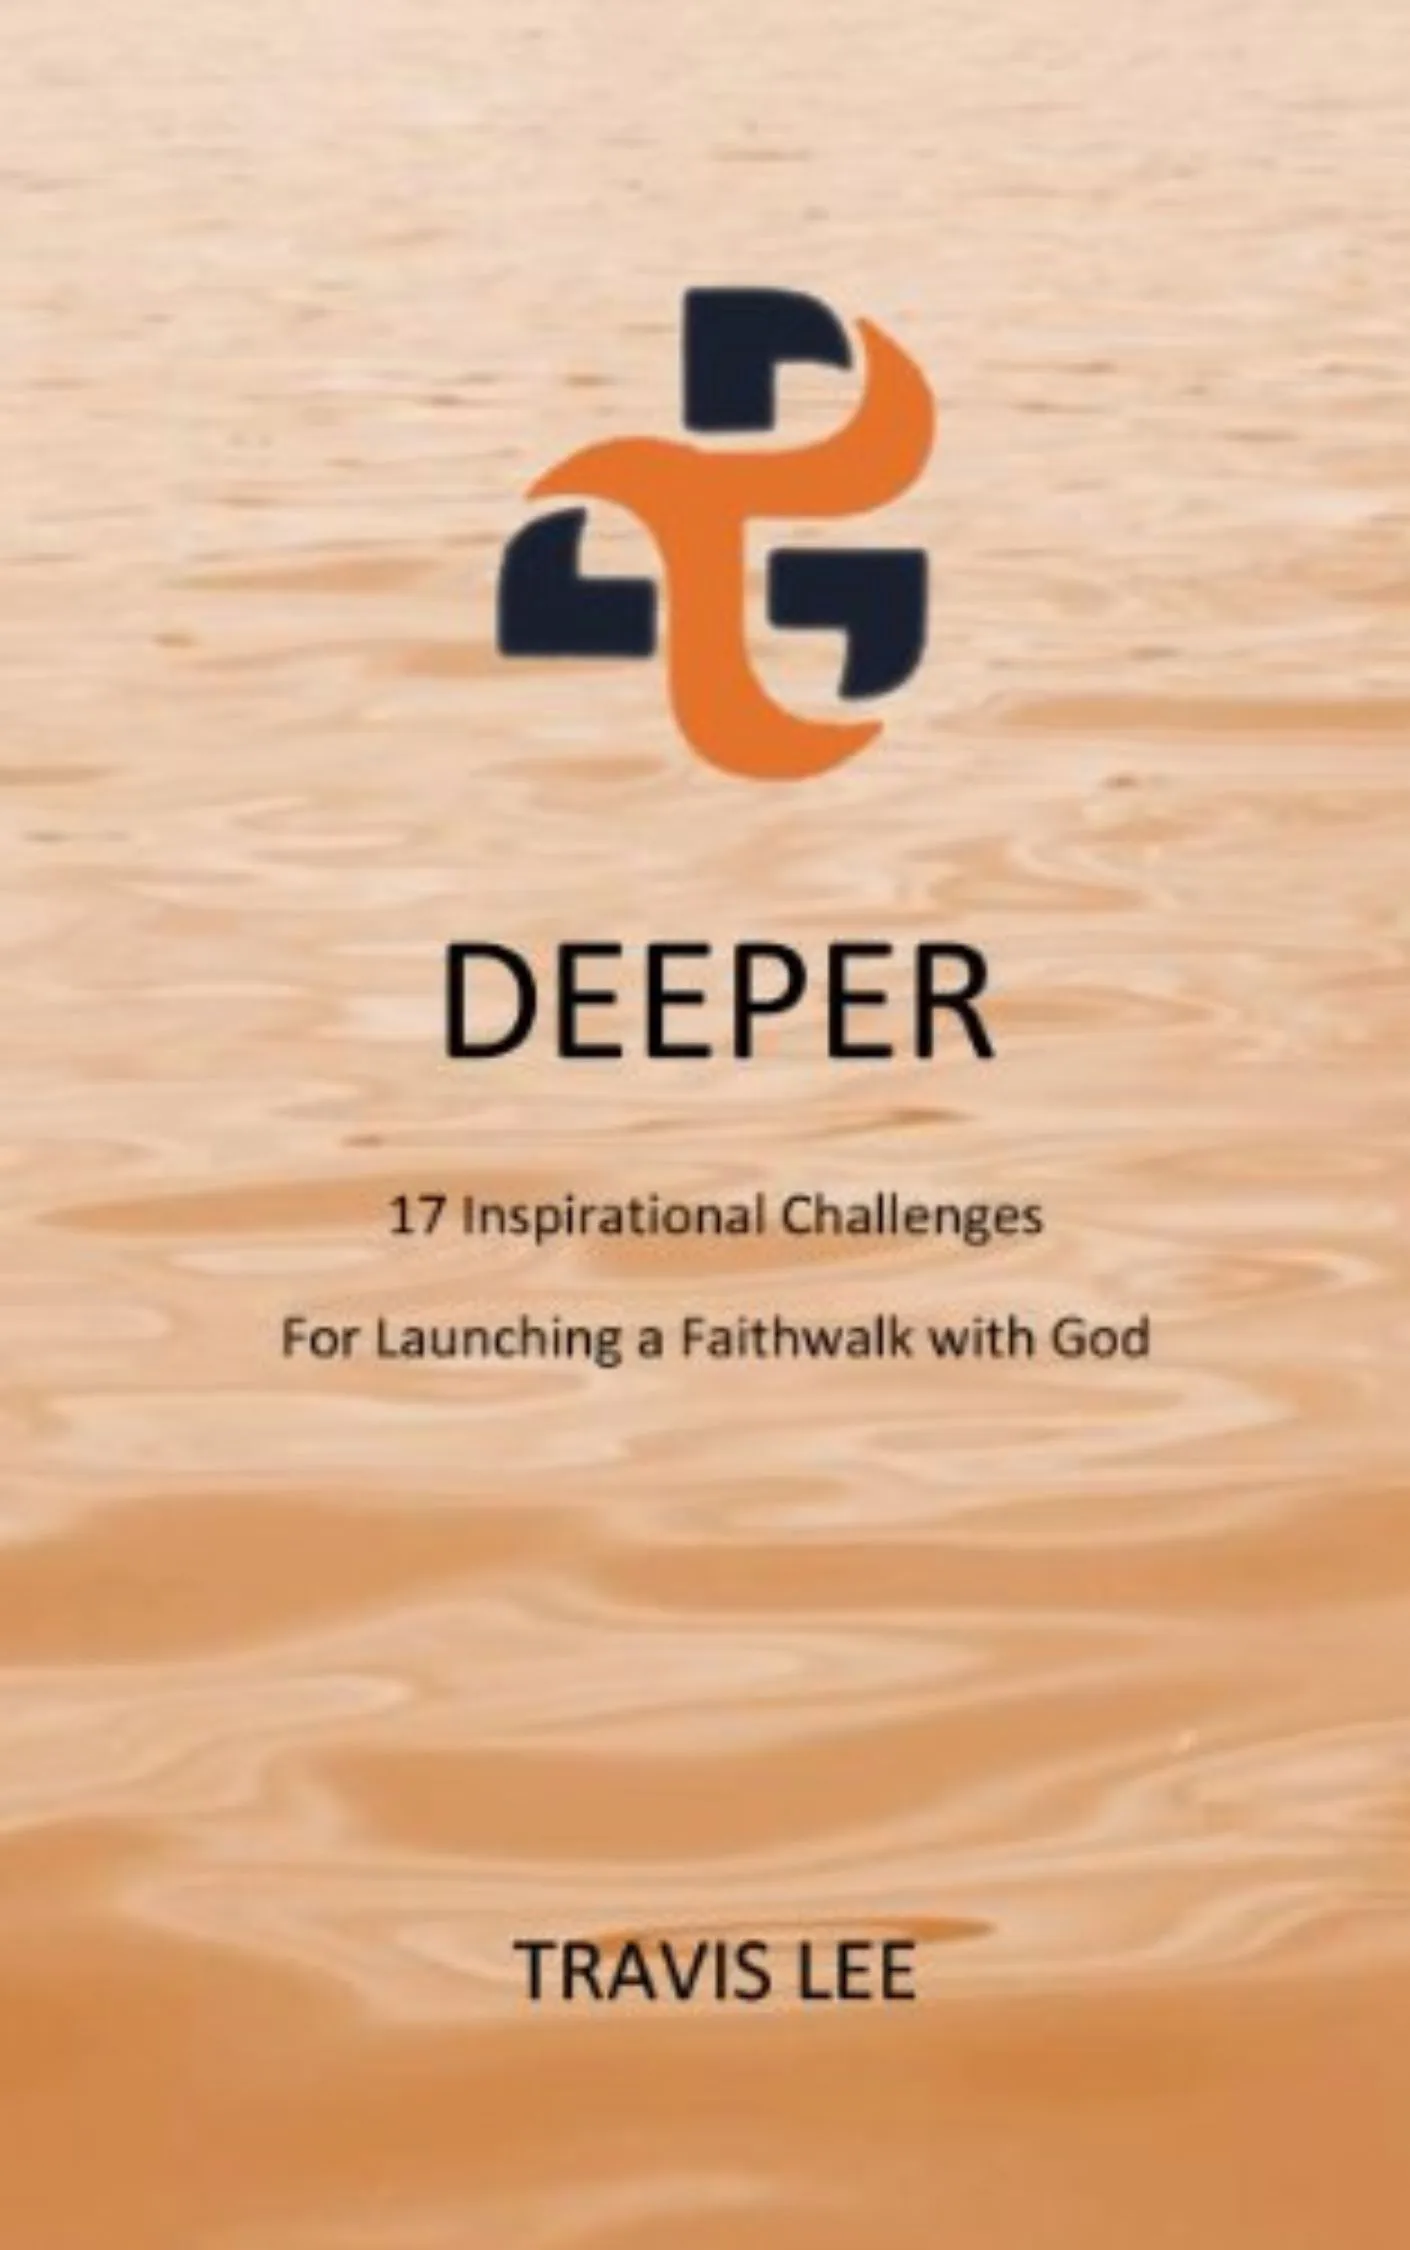 DEEPER: Launching a Faithwalk with God
by: Travis Lee